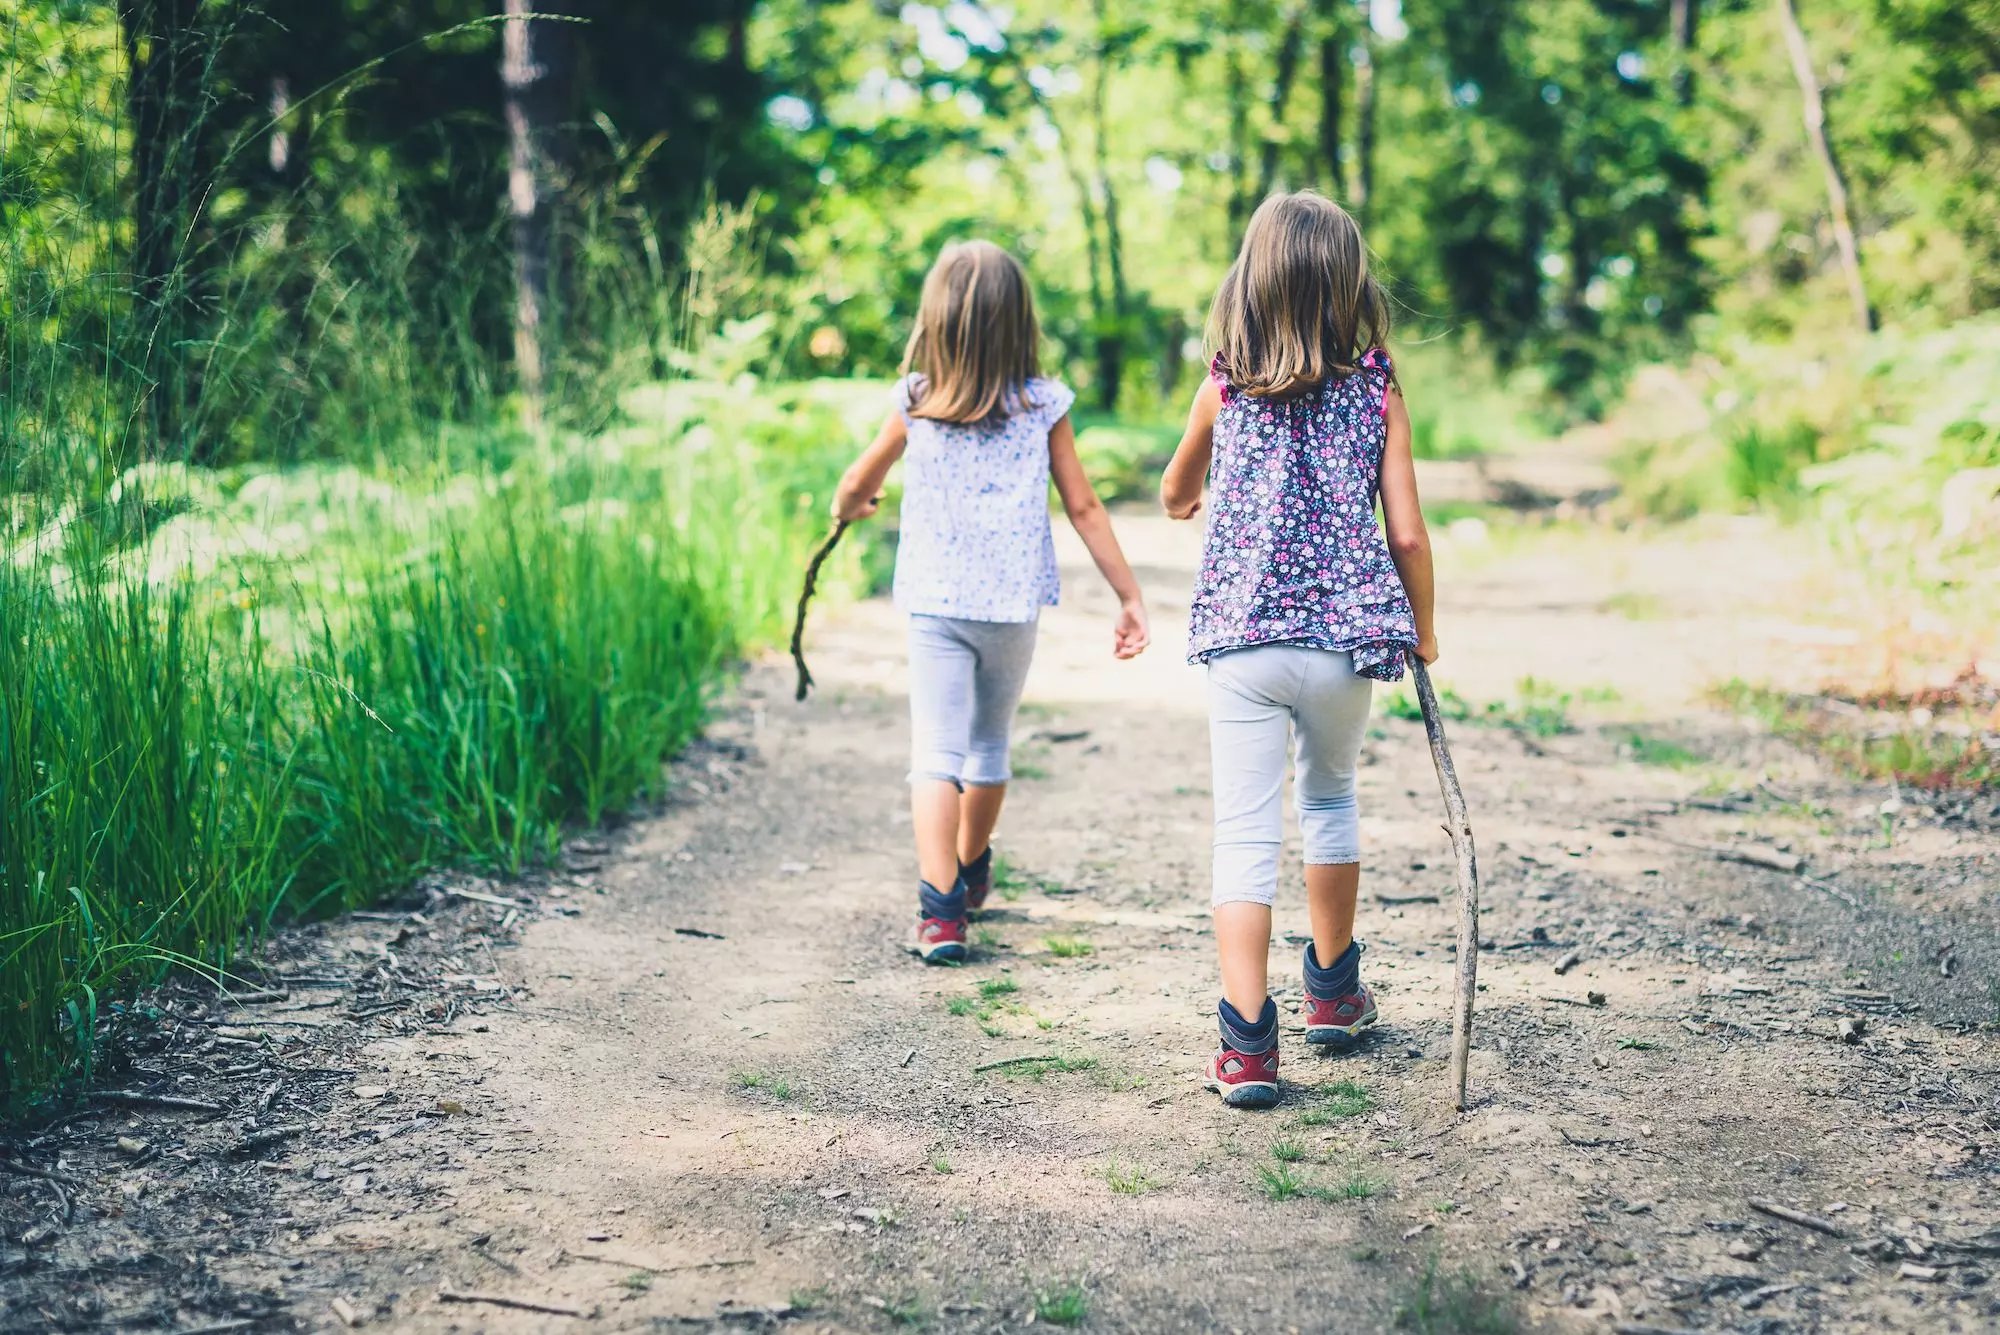 Hiking with kids - 5 tips on turning hiking into a fun experience